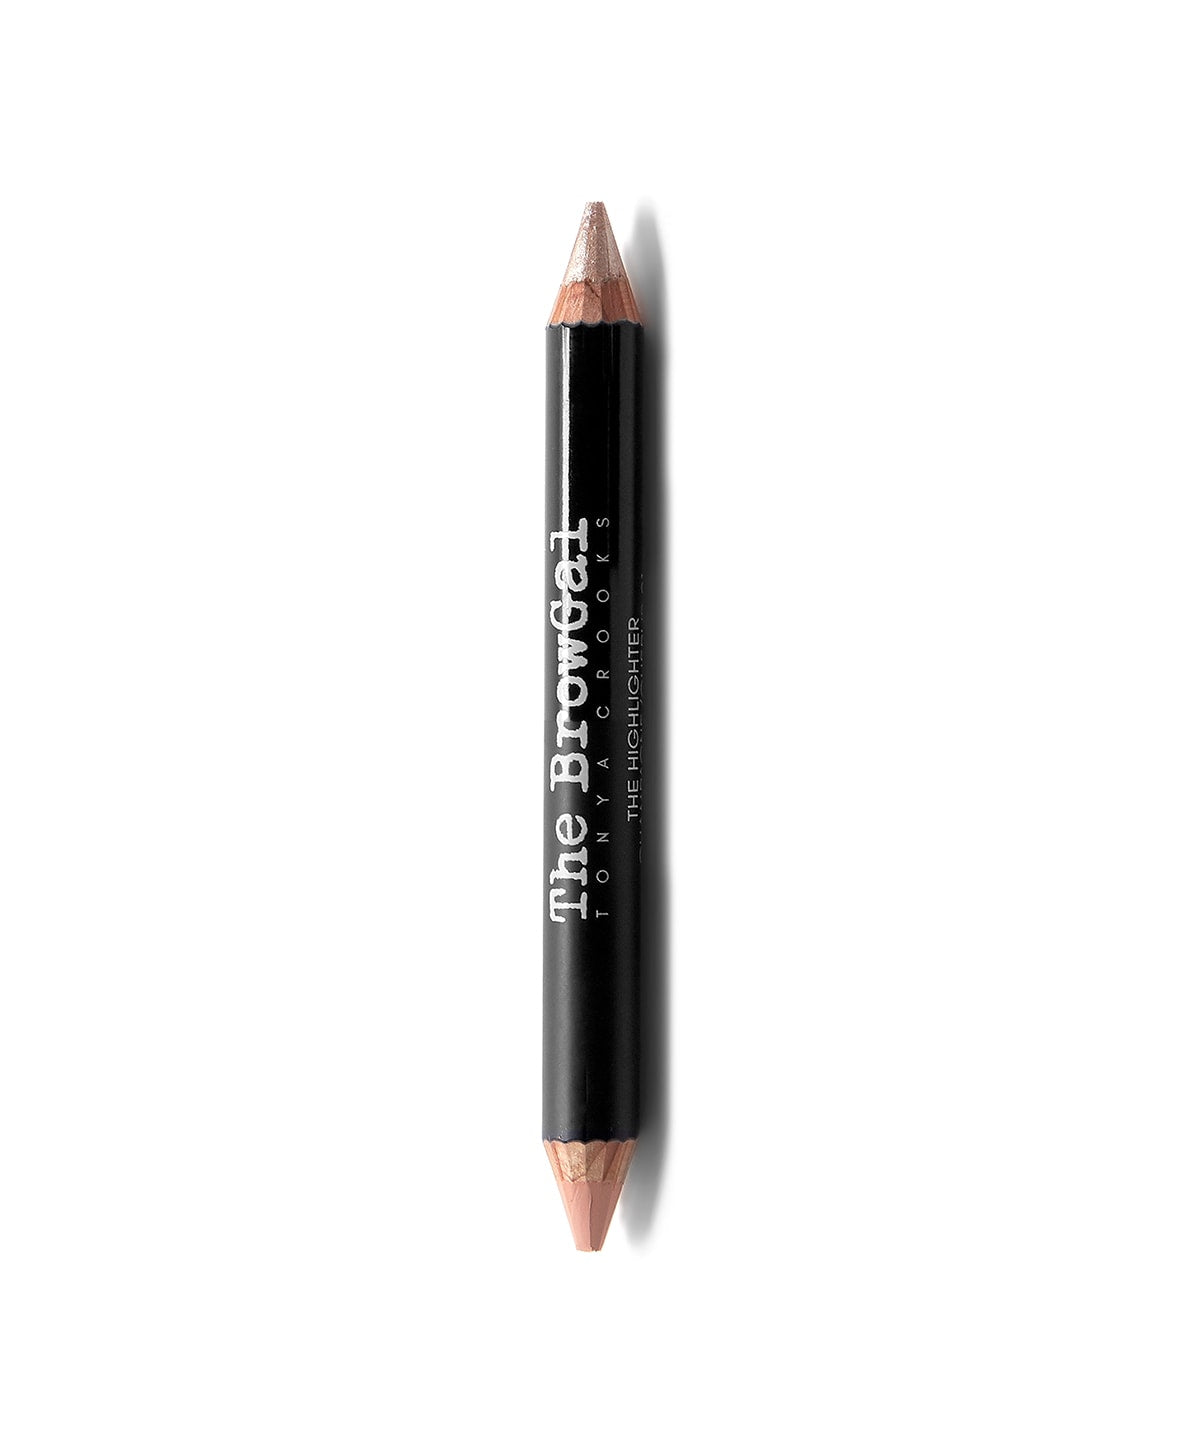 The BrowGal Highlighter/Concealer Duo Pencils